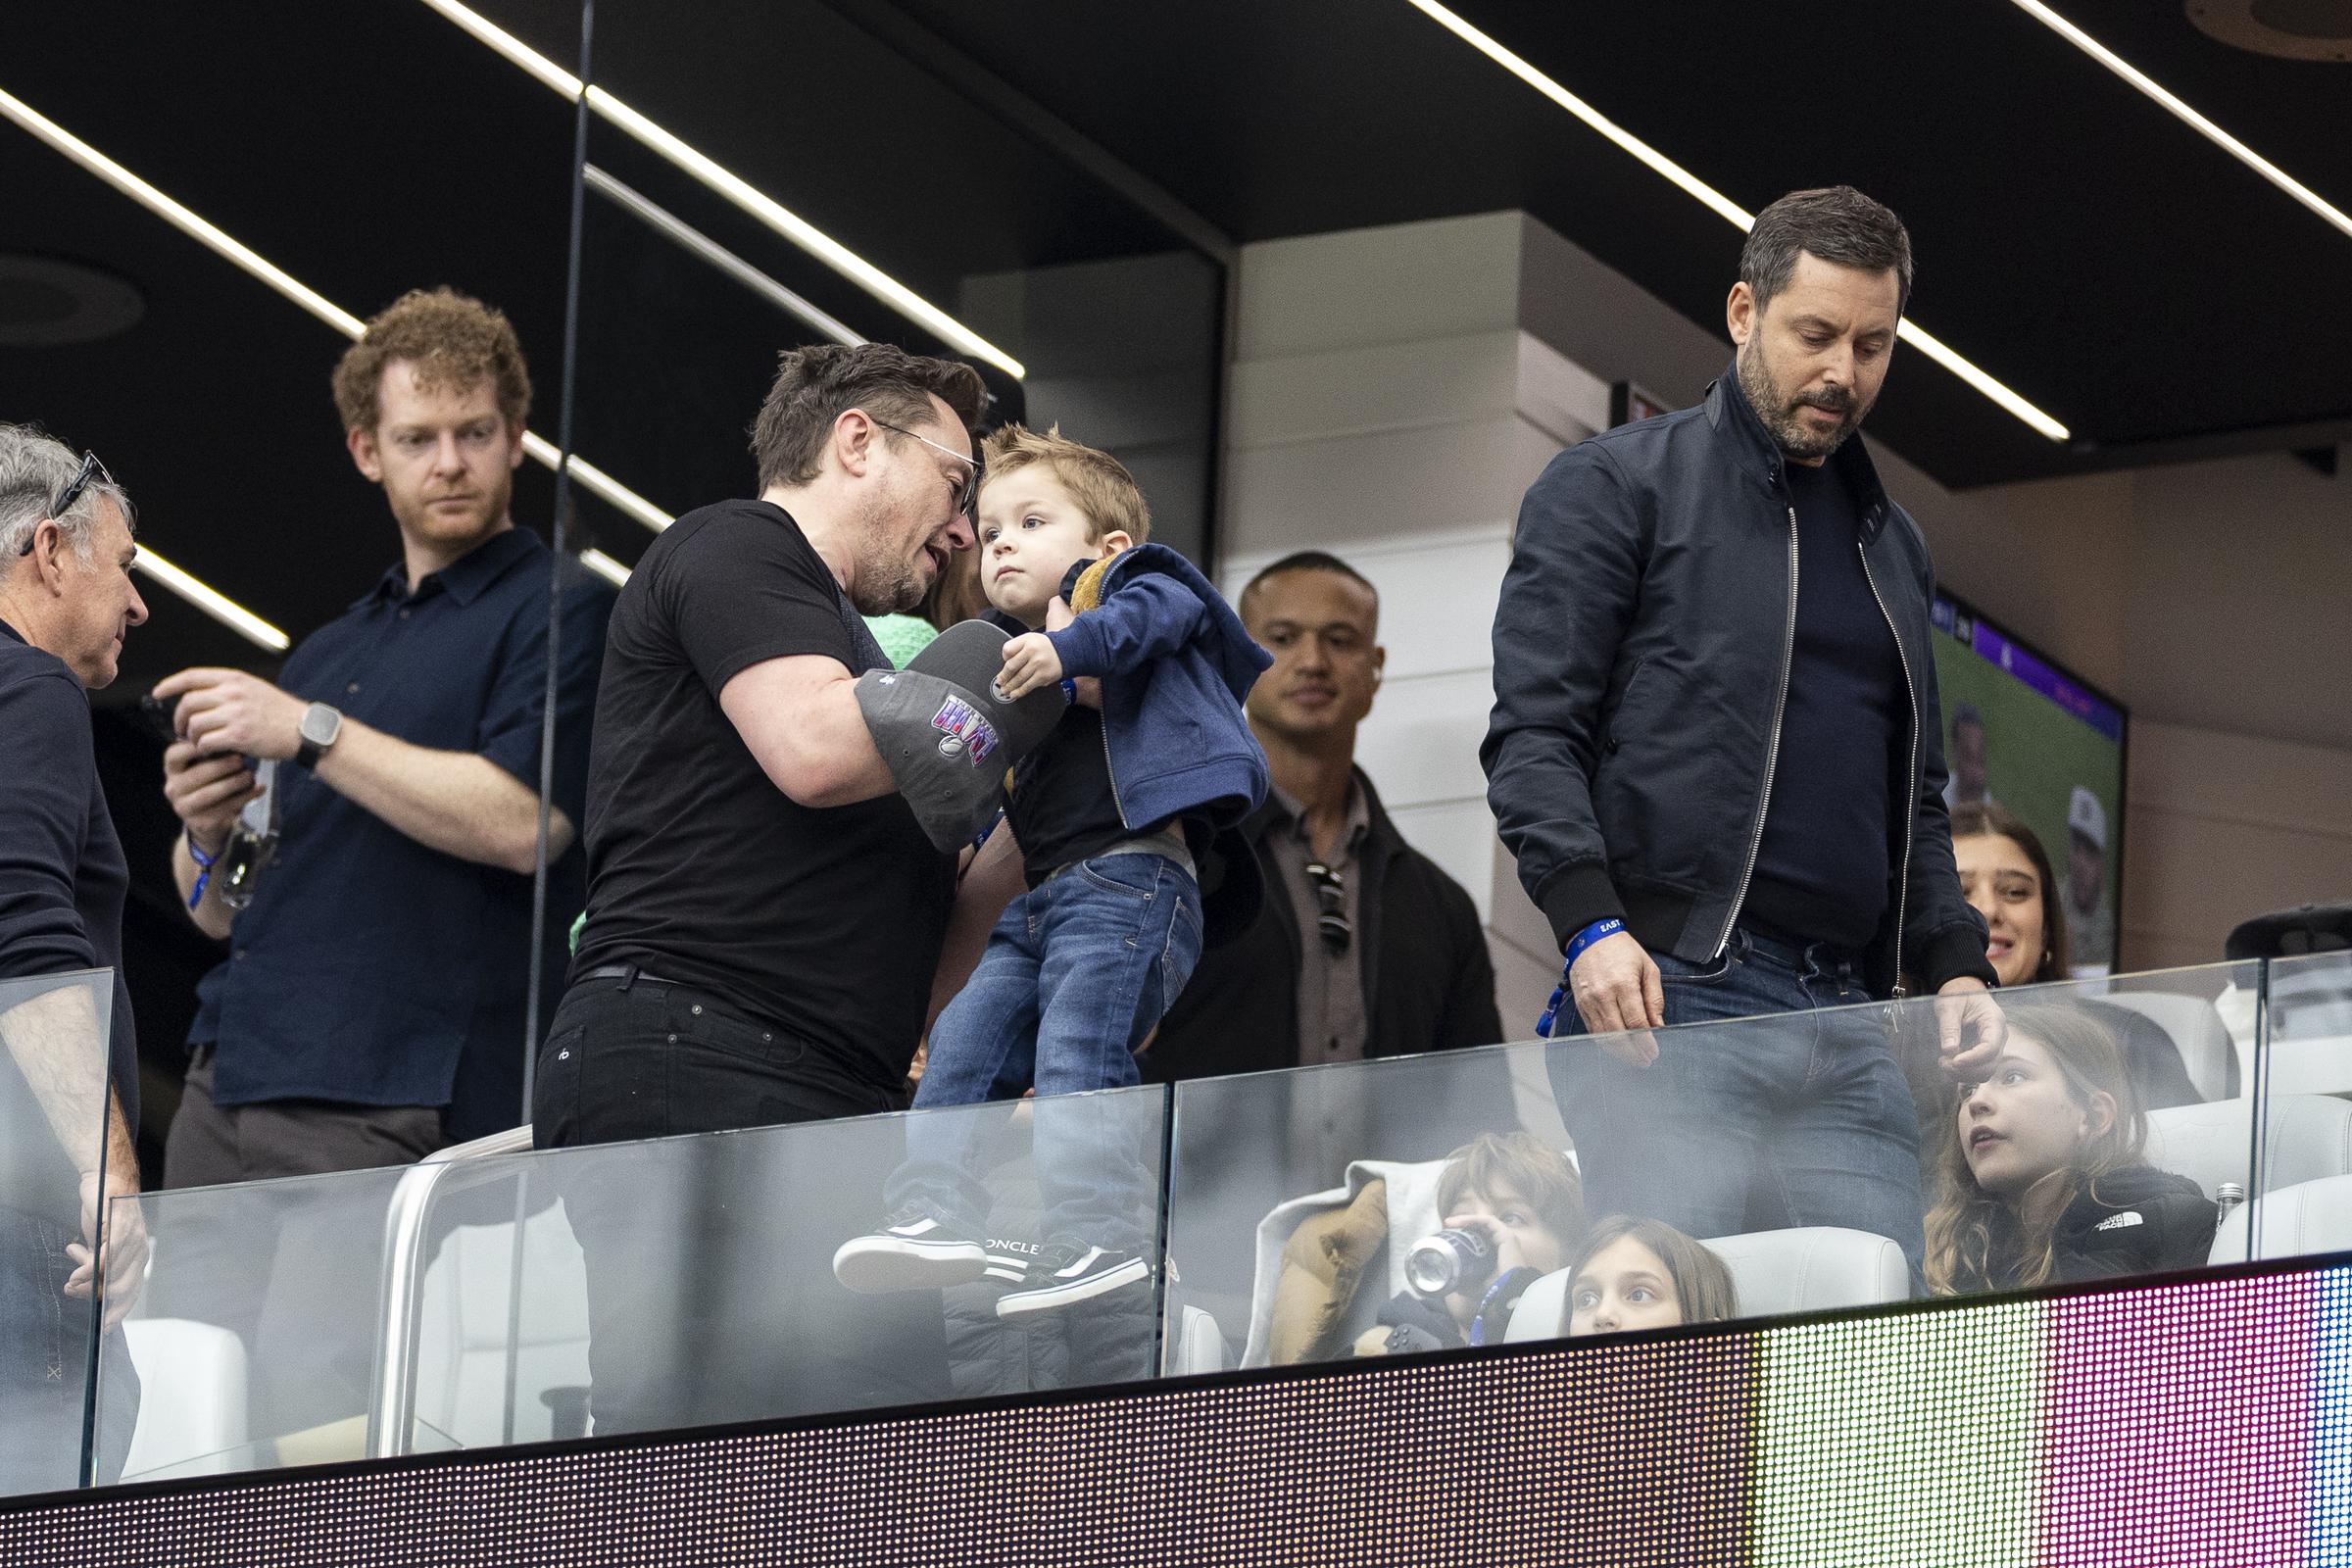 Elon Musk with his son, Exa Dark Sideræl, at the NFL Super Bowl 58 football game between the San Francisco 49ers and the Kansas City Chiefs in Las Vegas, Nevada on February 11, 2024 | Source: Getty Images